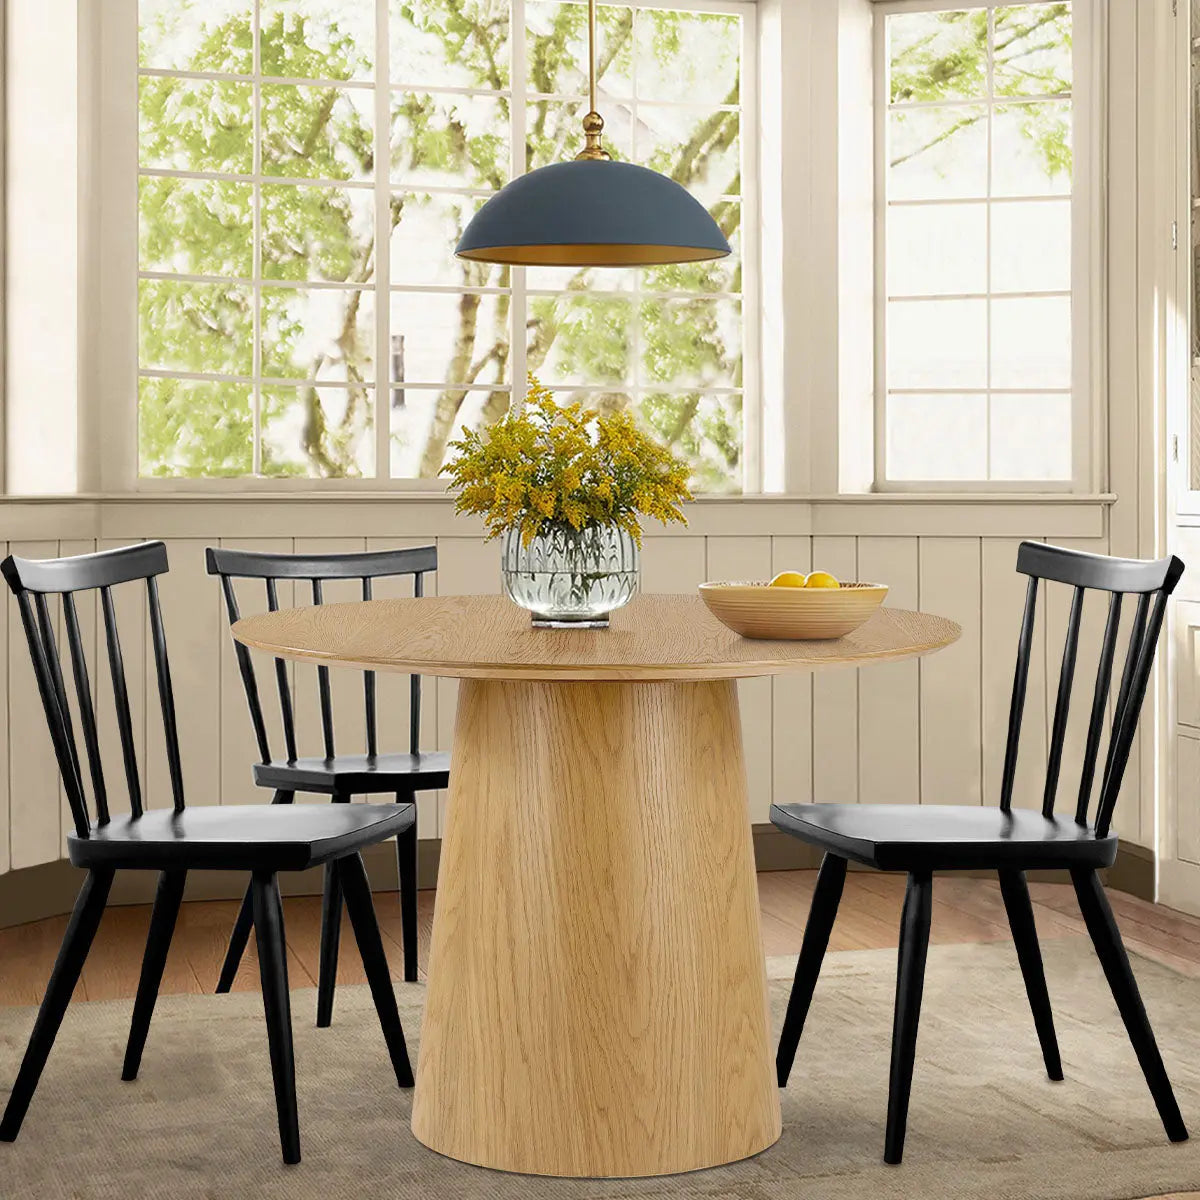 Saigong 42" Wooden Dining Table, Round Table For Small Apartment The Pop Maison